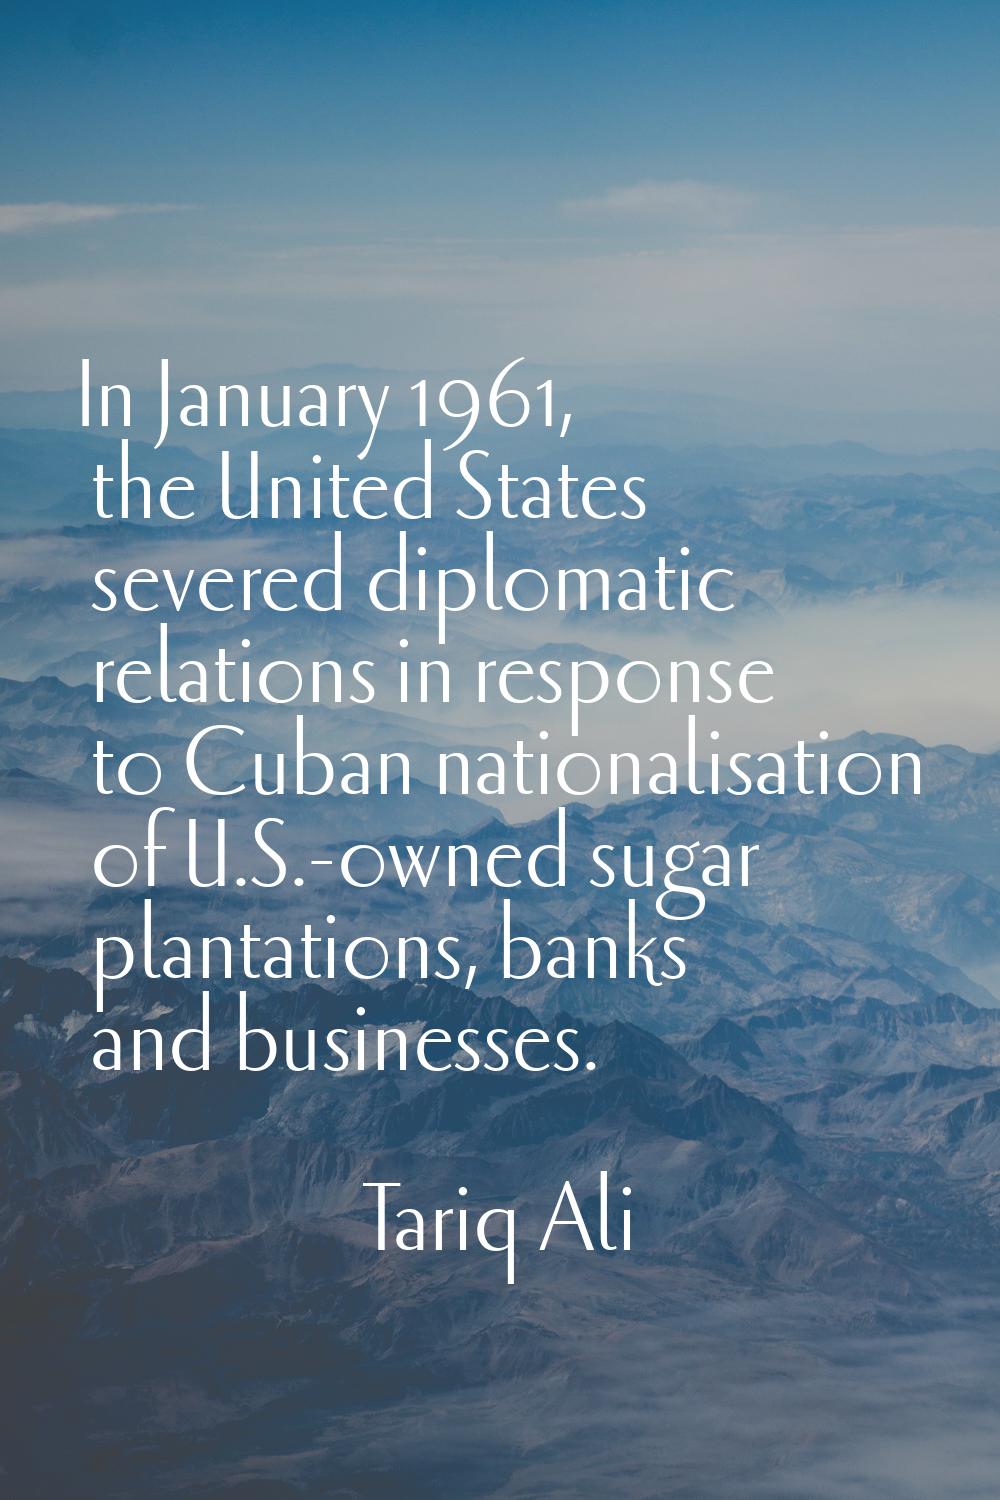 In January 1961, the United States severed diplomatic relations in response to Cuban nationalisatio